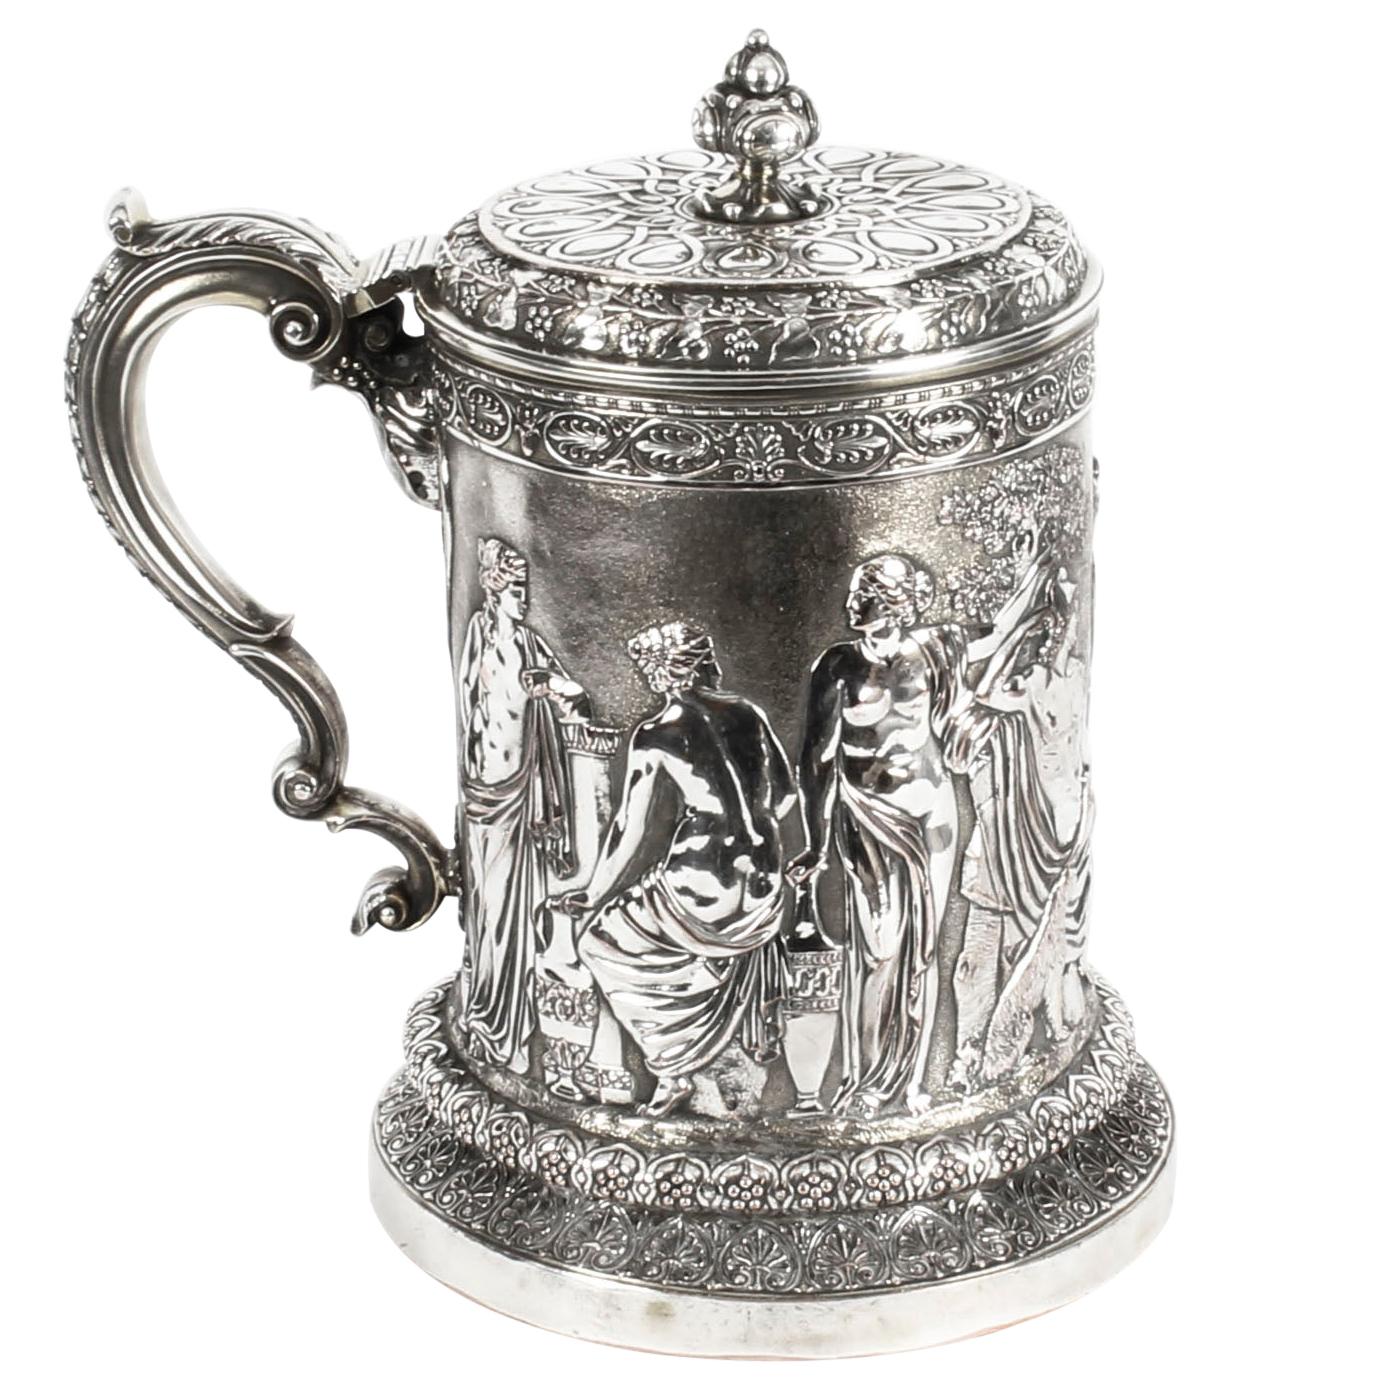 Antique Silver Plated Lidded Tankard by Elkington, 19th Century